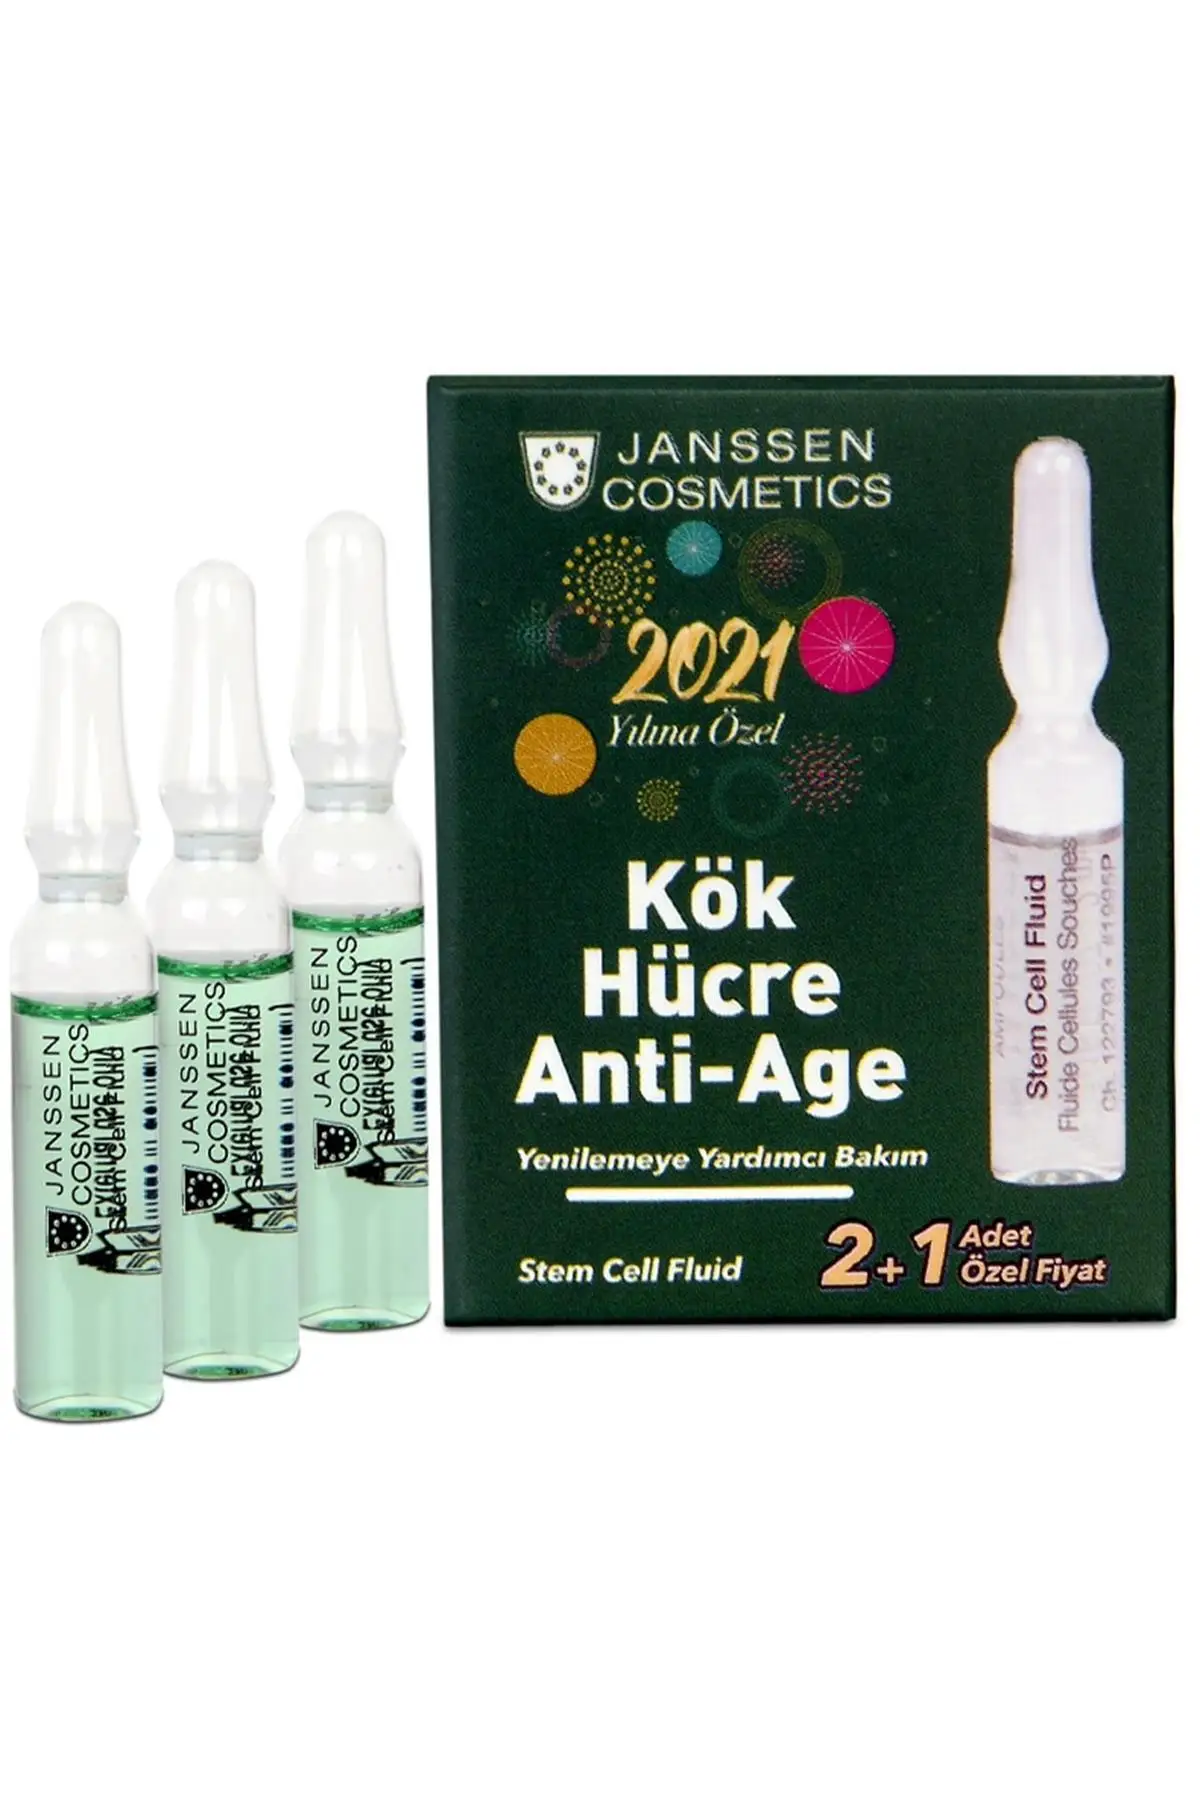 

Brand: Janssen Cosmetics Stem Cell Anti-Age Bulb 3'lü Category: Facial Cleanser